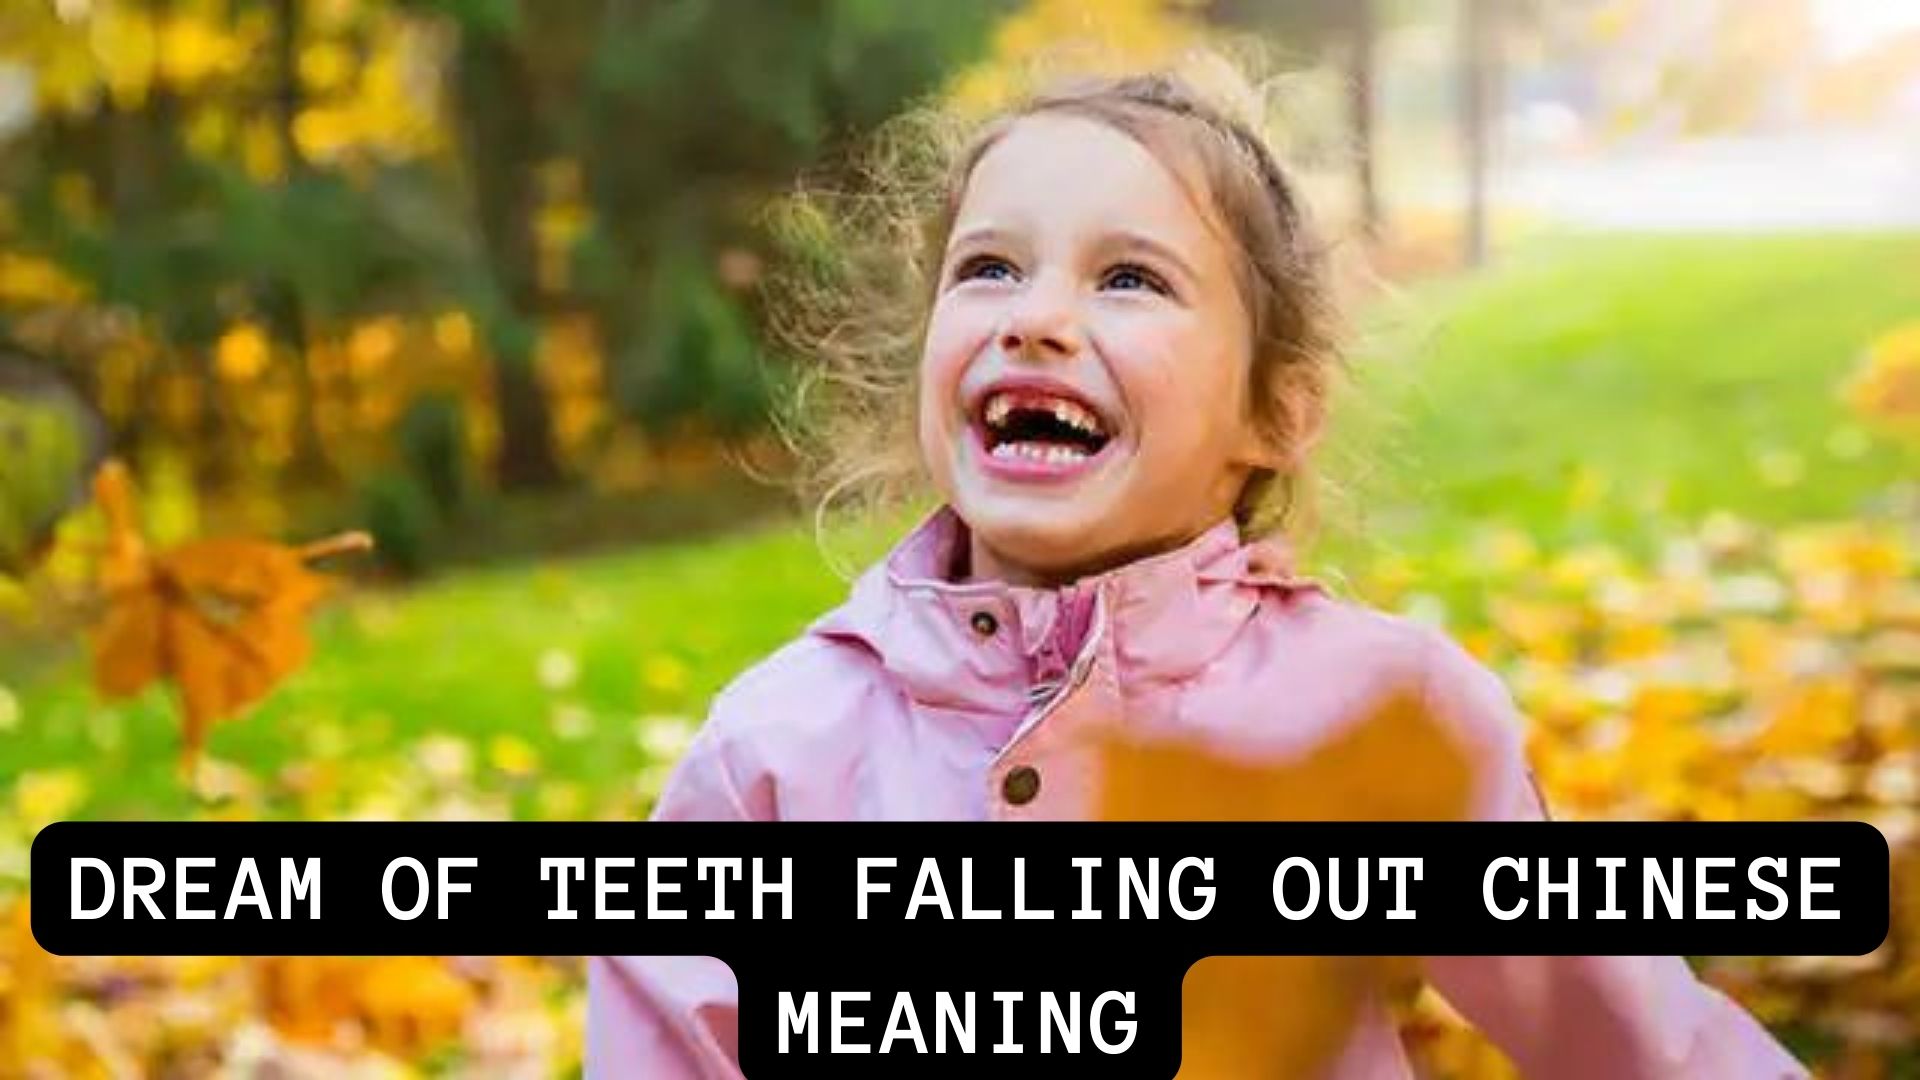 Dream Of Teeth Falling Out Chinese Meaning & Interpretation